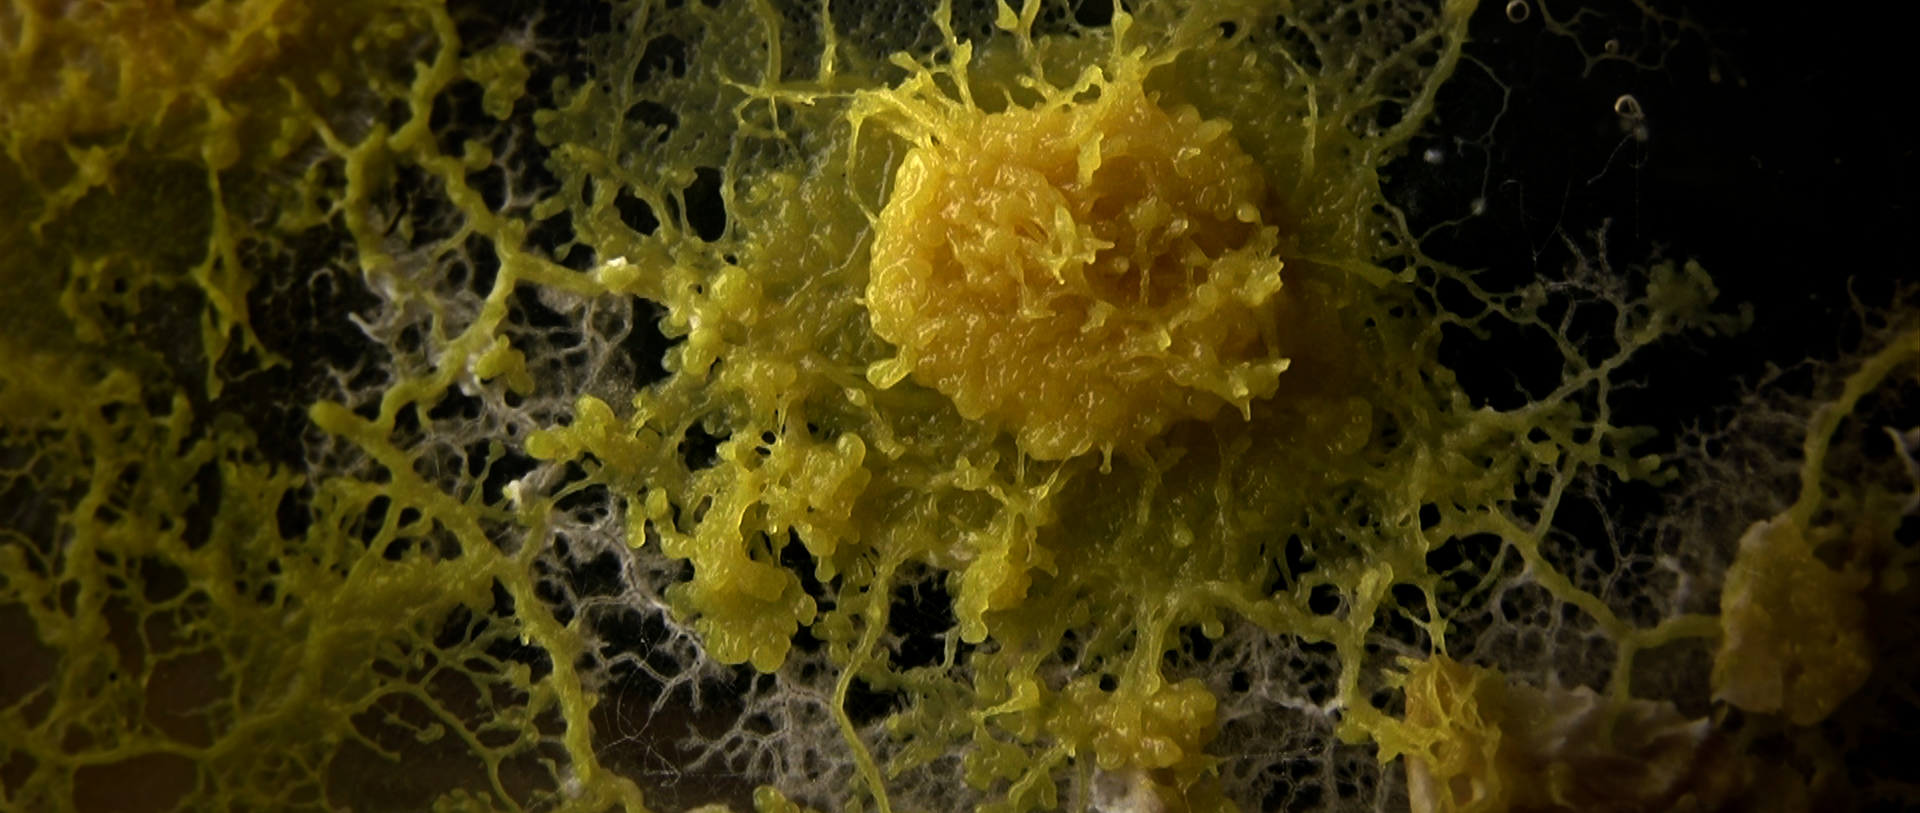 The Emperor’s Love of Slime Mold